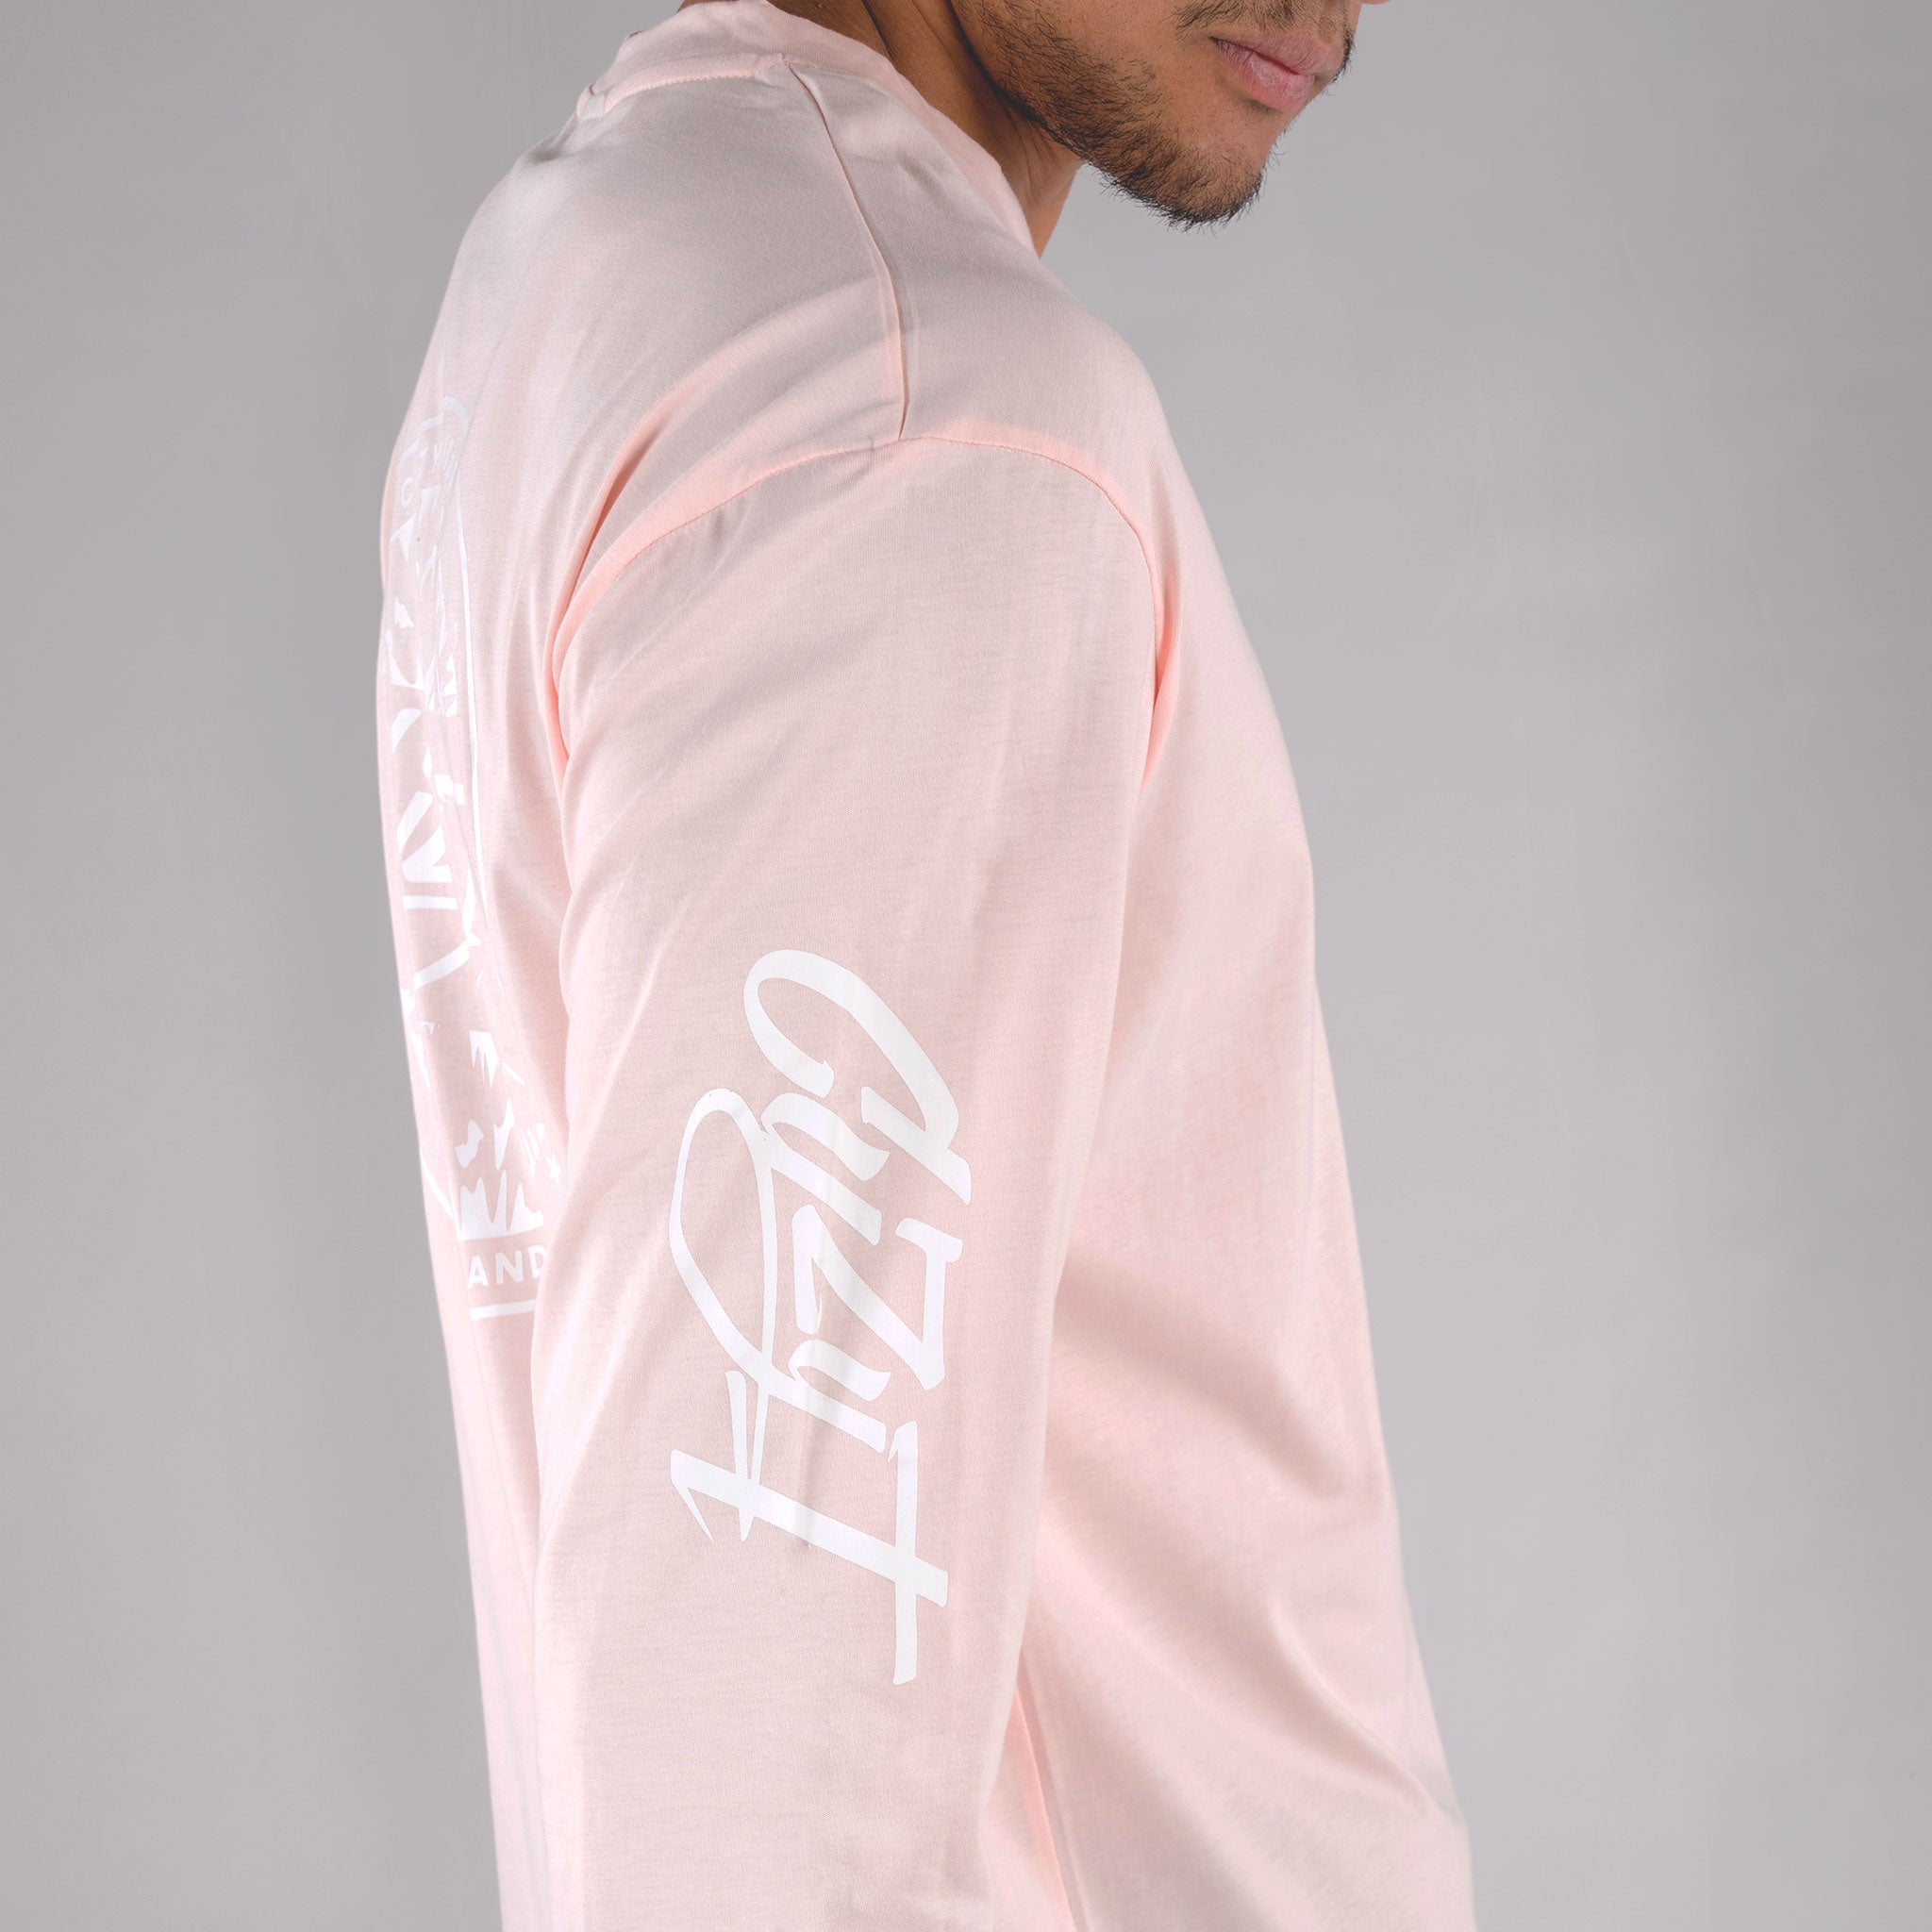 ICONIC LONG SLEEVE TAIL TEE PINK - Cuzy T Apparel